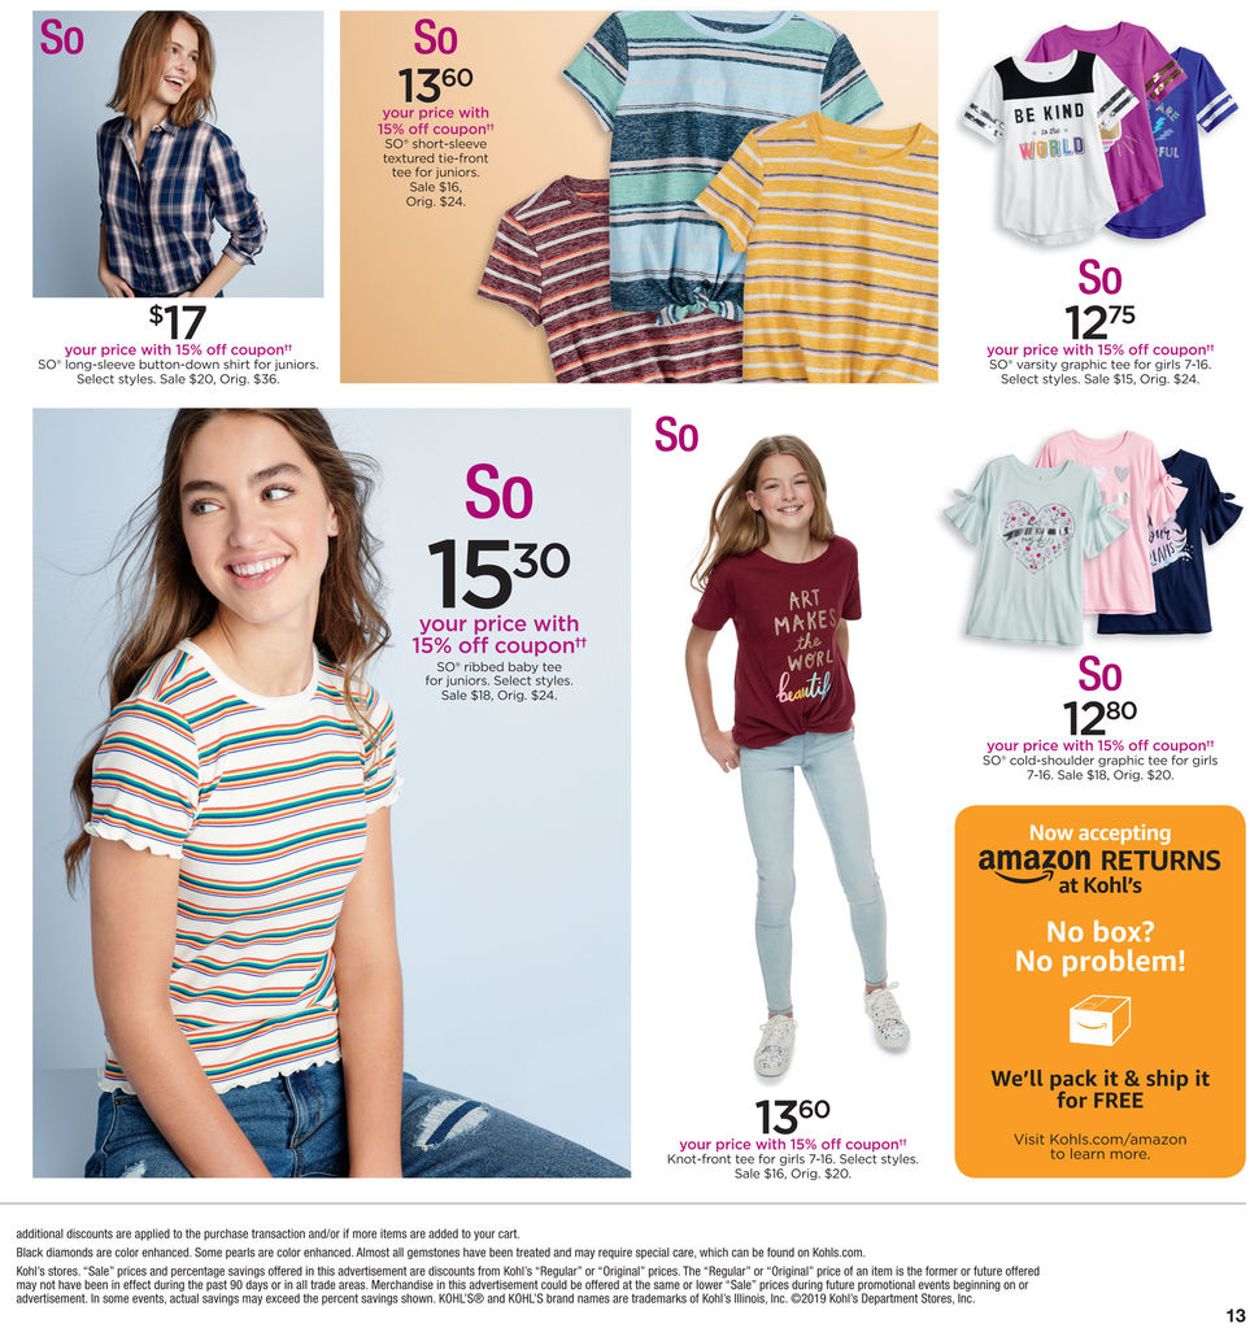 Kohl's Current weekly ad 08/04 - 08/11/2019 [13] - frequent-ads.com